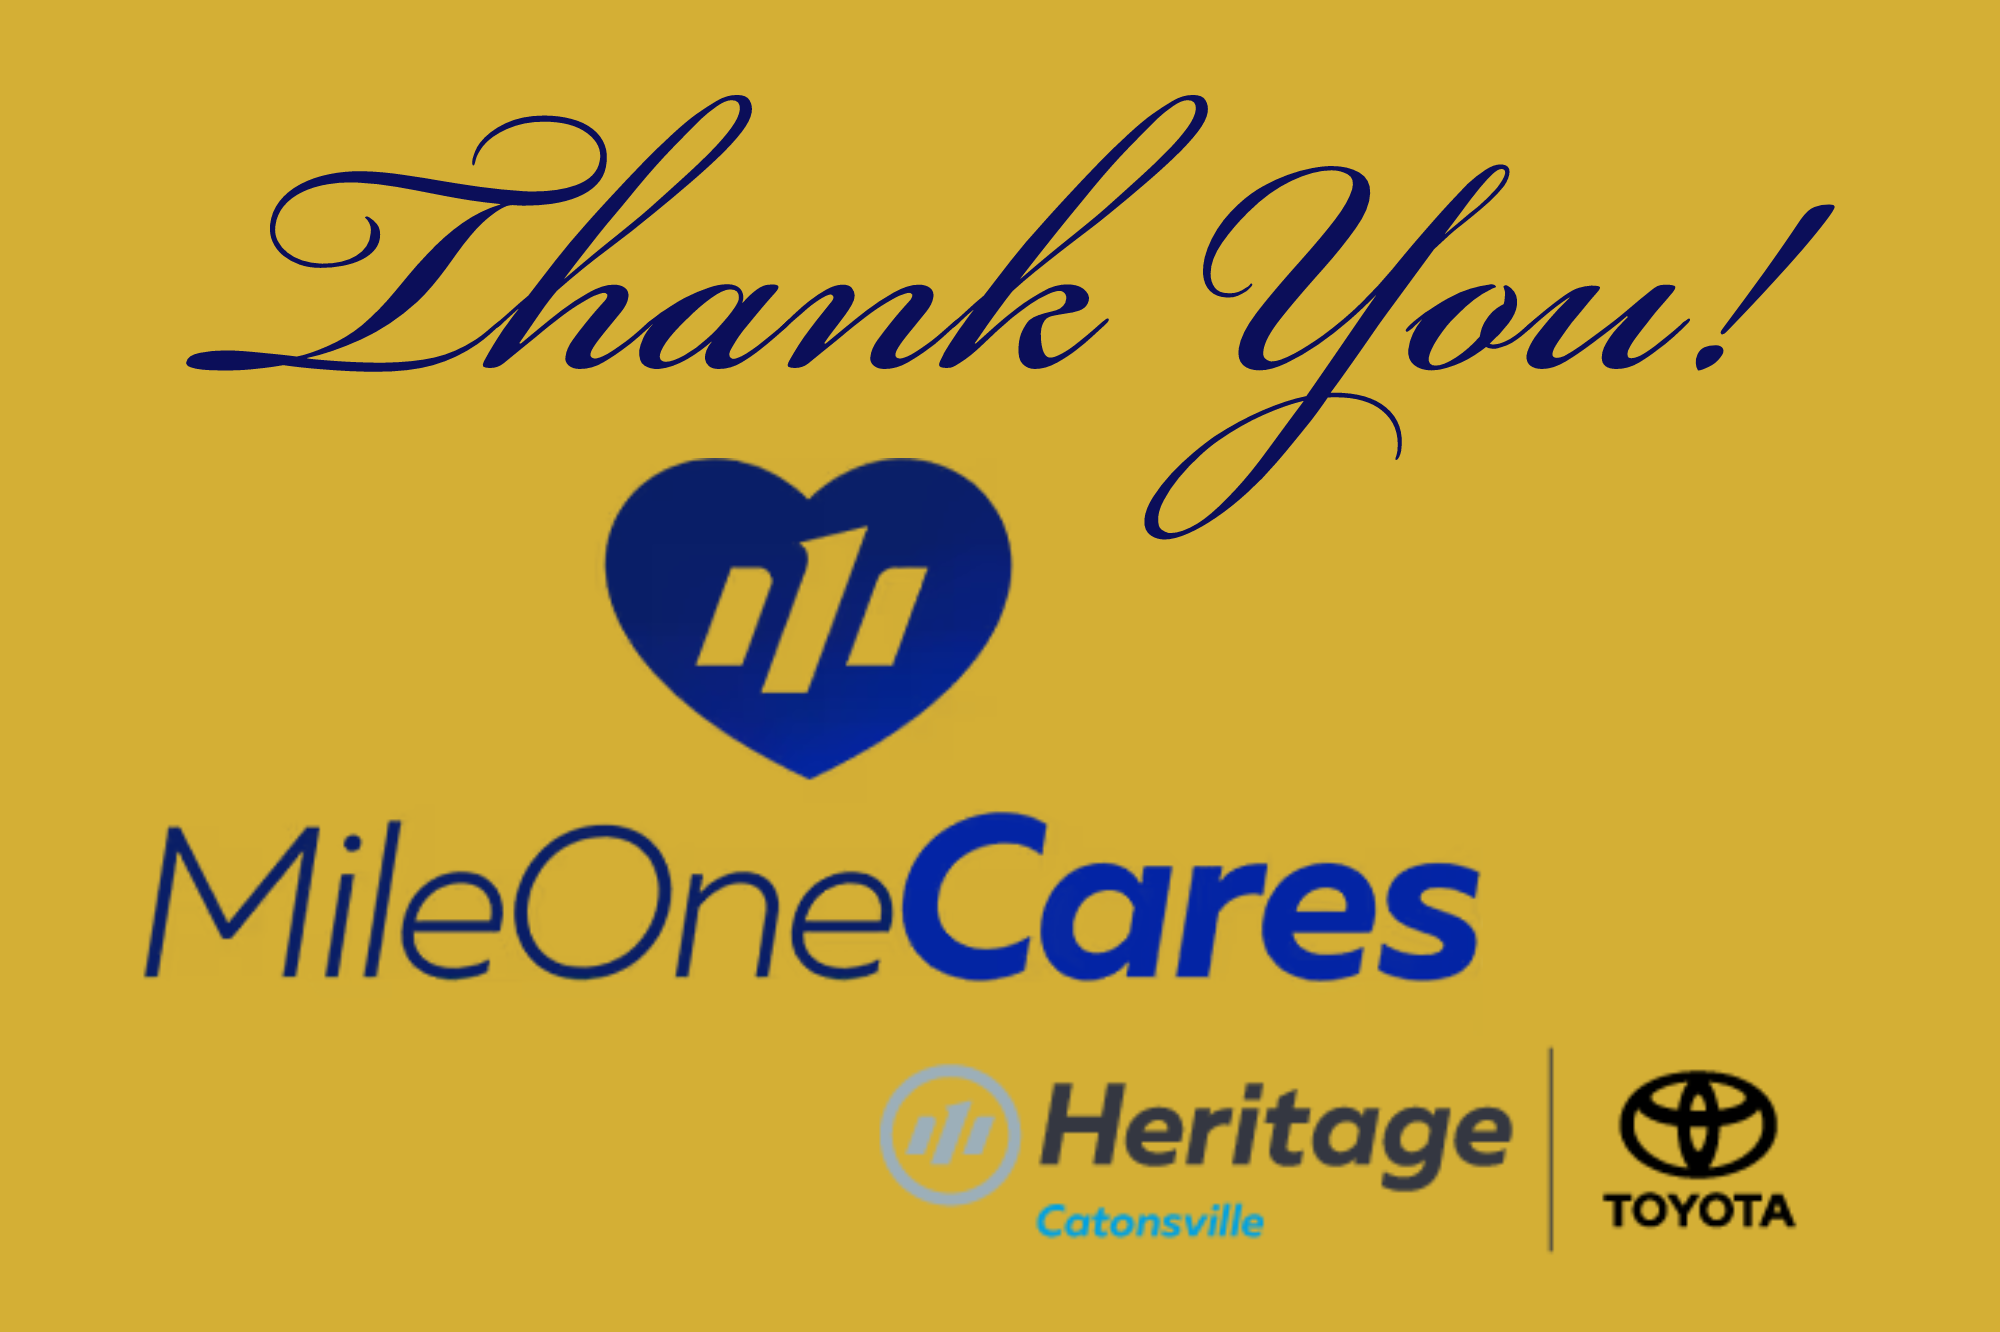 Thank You to Mile One Cares